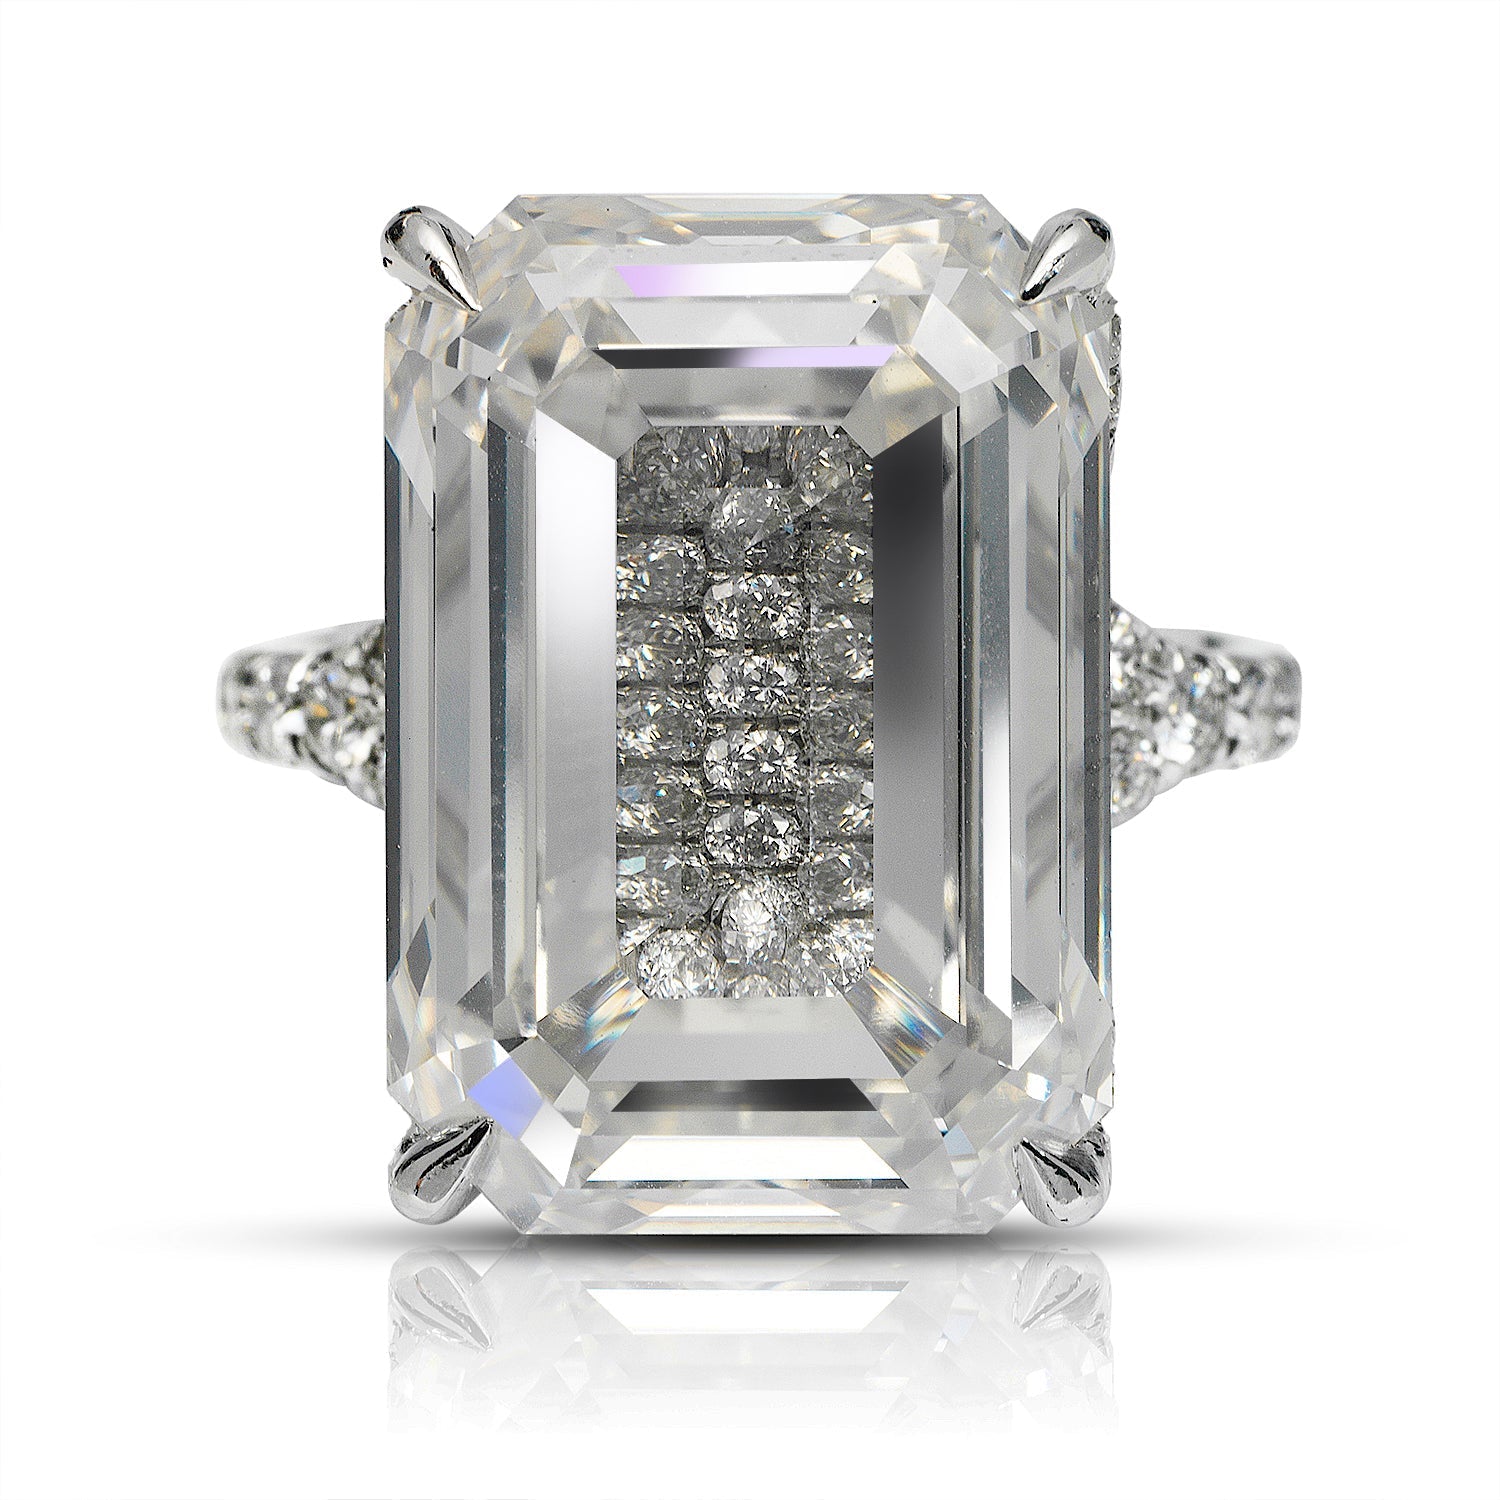 Diamond Ring Emerald Cut 22 Carat Halo Ring in Platinum Front View